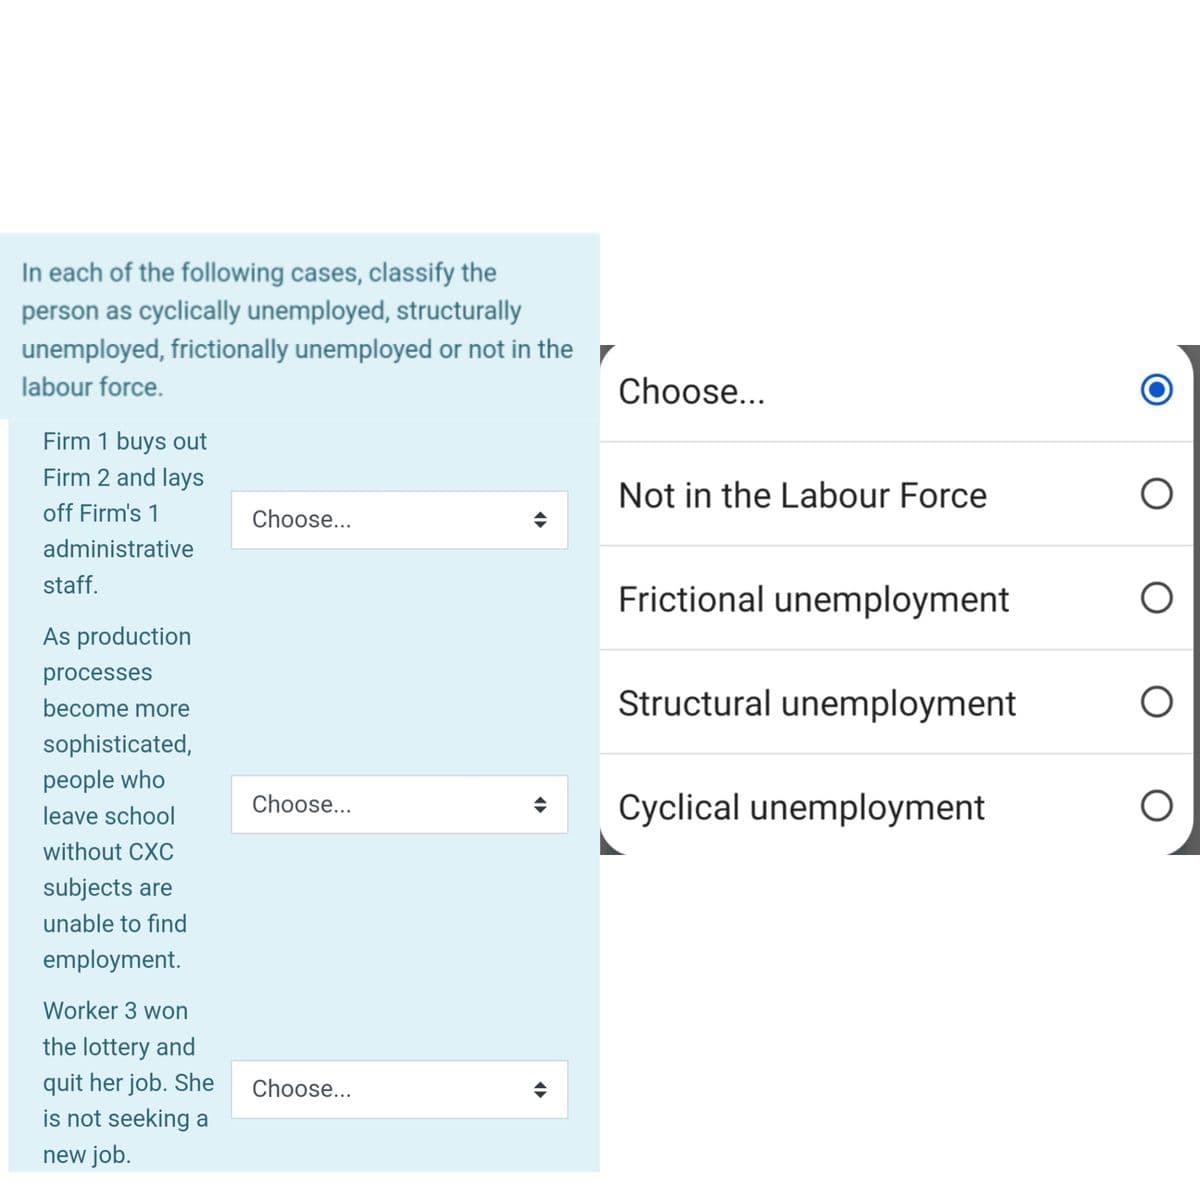 In each of the following cases, classify the
person as cyclically unemployed, structurally
unemployed, frictionally unemployed or not in the
labour force.
Firm 1 buys out
Firm 2 and lays
off Firm's 1
administrative
staff.
As production
processes
become more
sophisticated,
people who
leave school
without CXC
subjects are
unable to find
employment.
Worker 3 won
the lottery and
quit her job. She
is not seeking a
new job.
Choose...
Choose...
Choose...
(▶
Choose...
Not in the Labour Force
Frictional unemployment
Structural unemployment
Cyclical unemployment